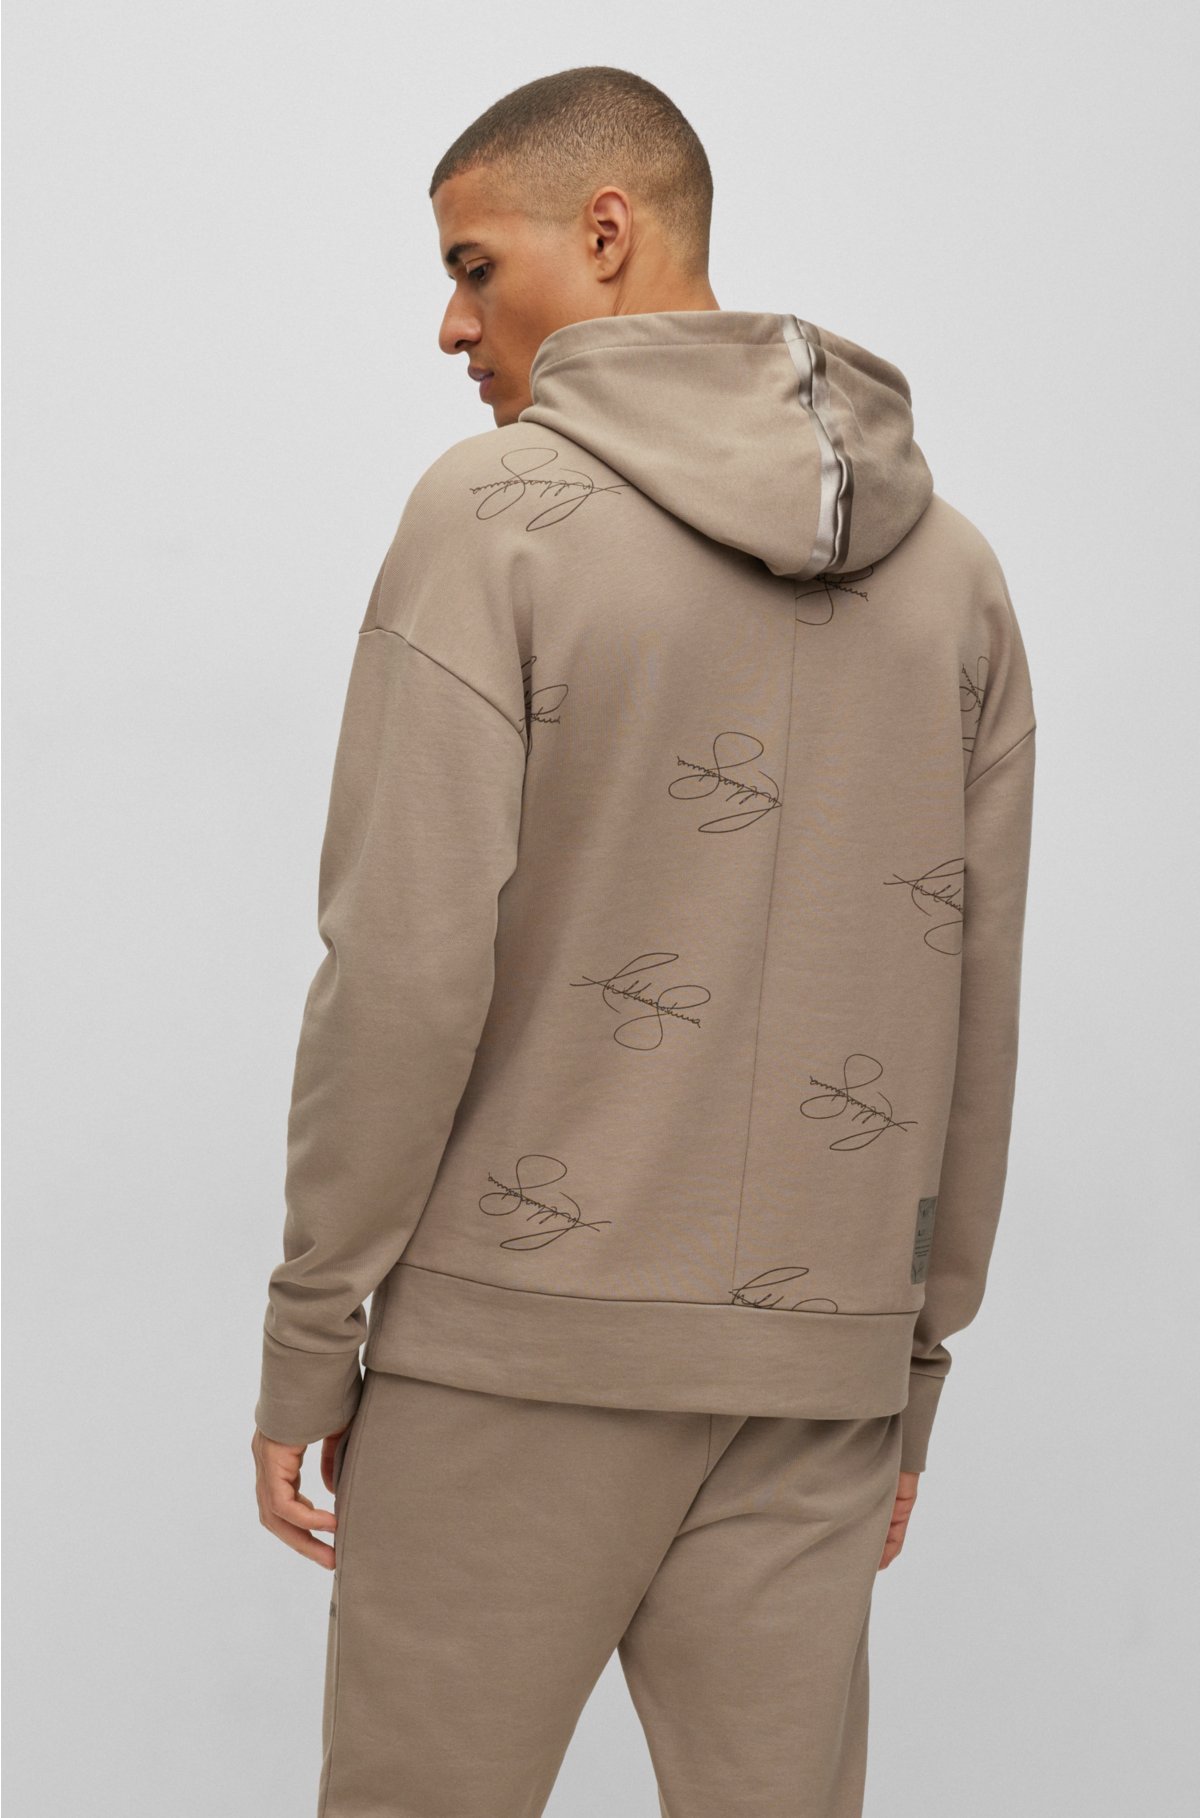 BOSS - BOSS branding with cotton collaborative x hoodie AJBXNG relaxed-fit